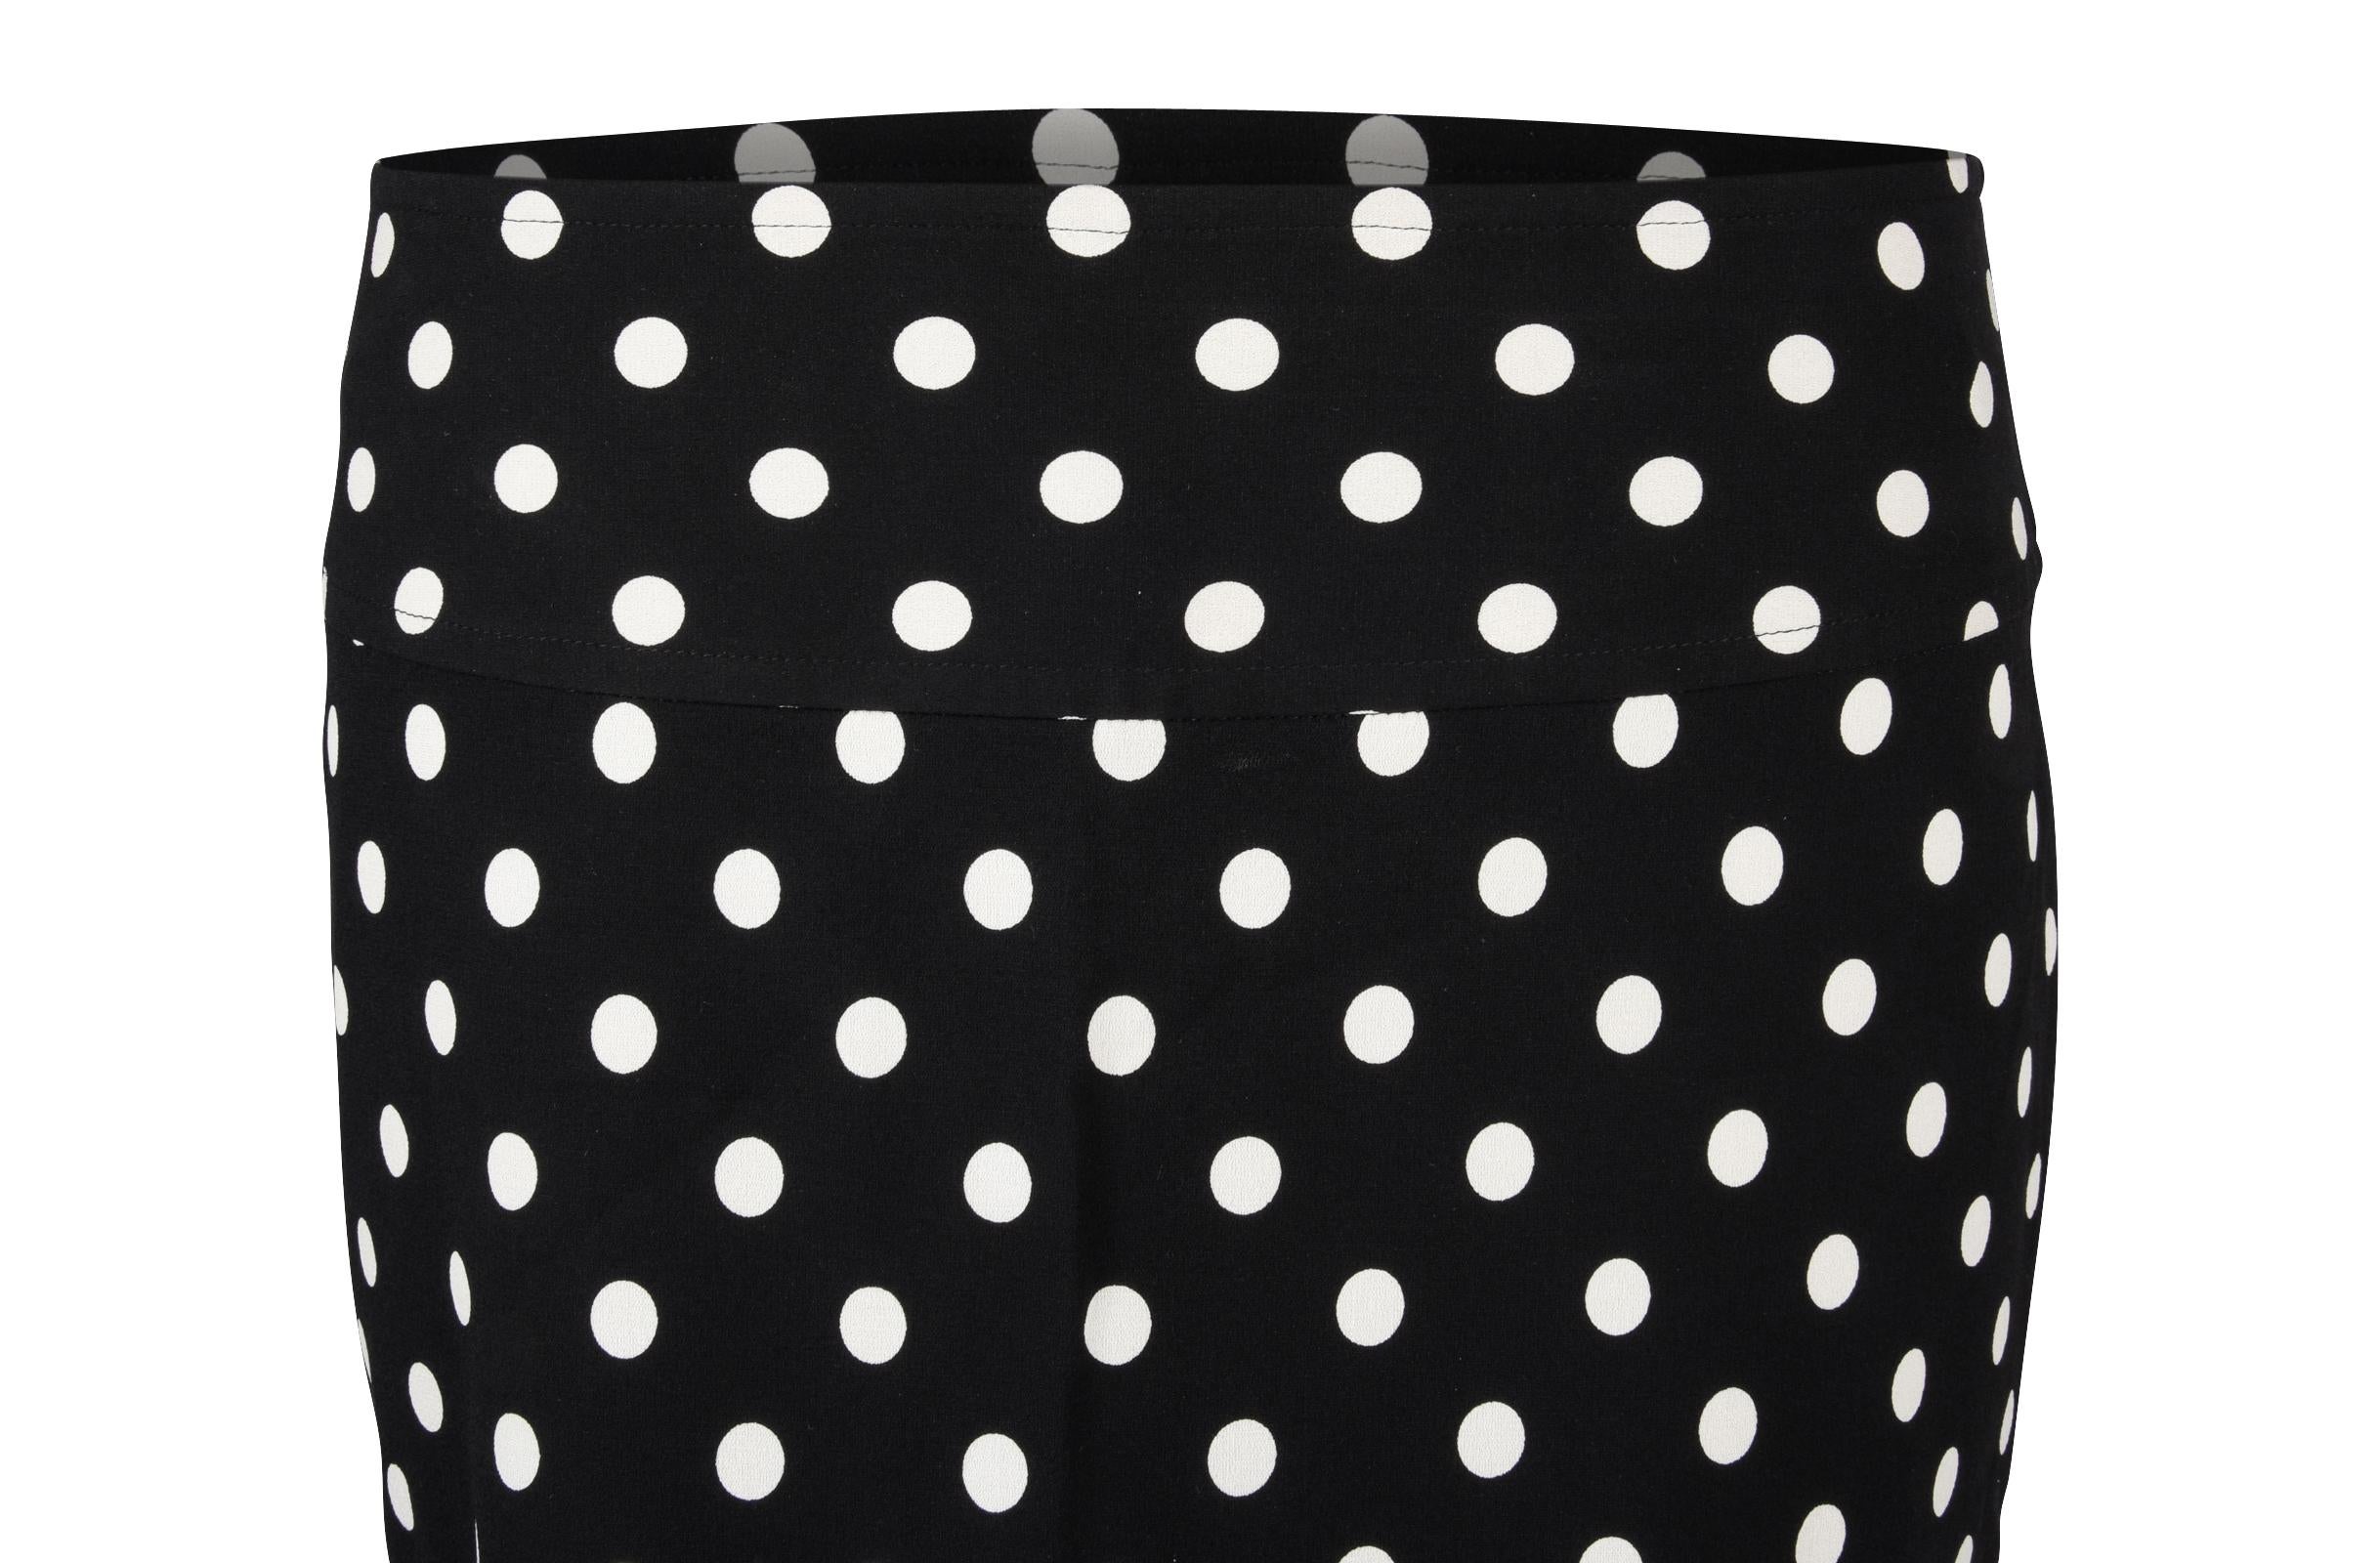 Dolce&Gabbana Skirt Polka Dot Lace Trim Stretch Pencil 38 / 4  In Excellent Condition For Sale In Miami, FL